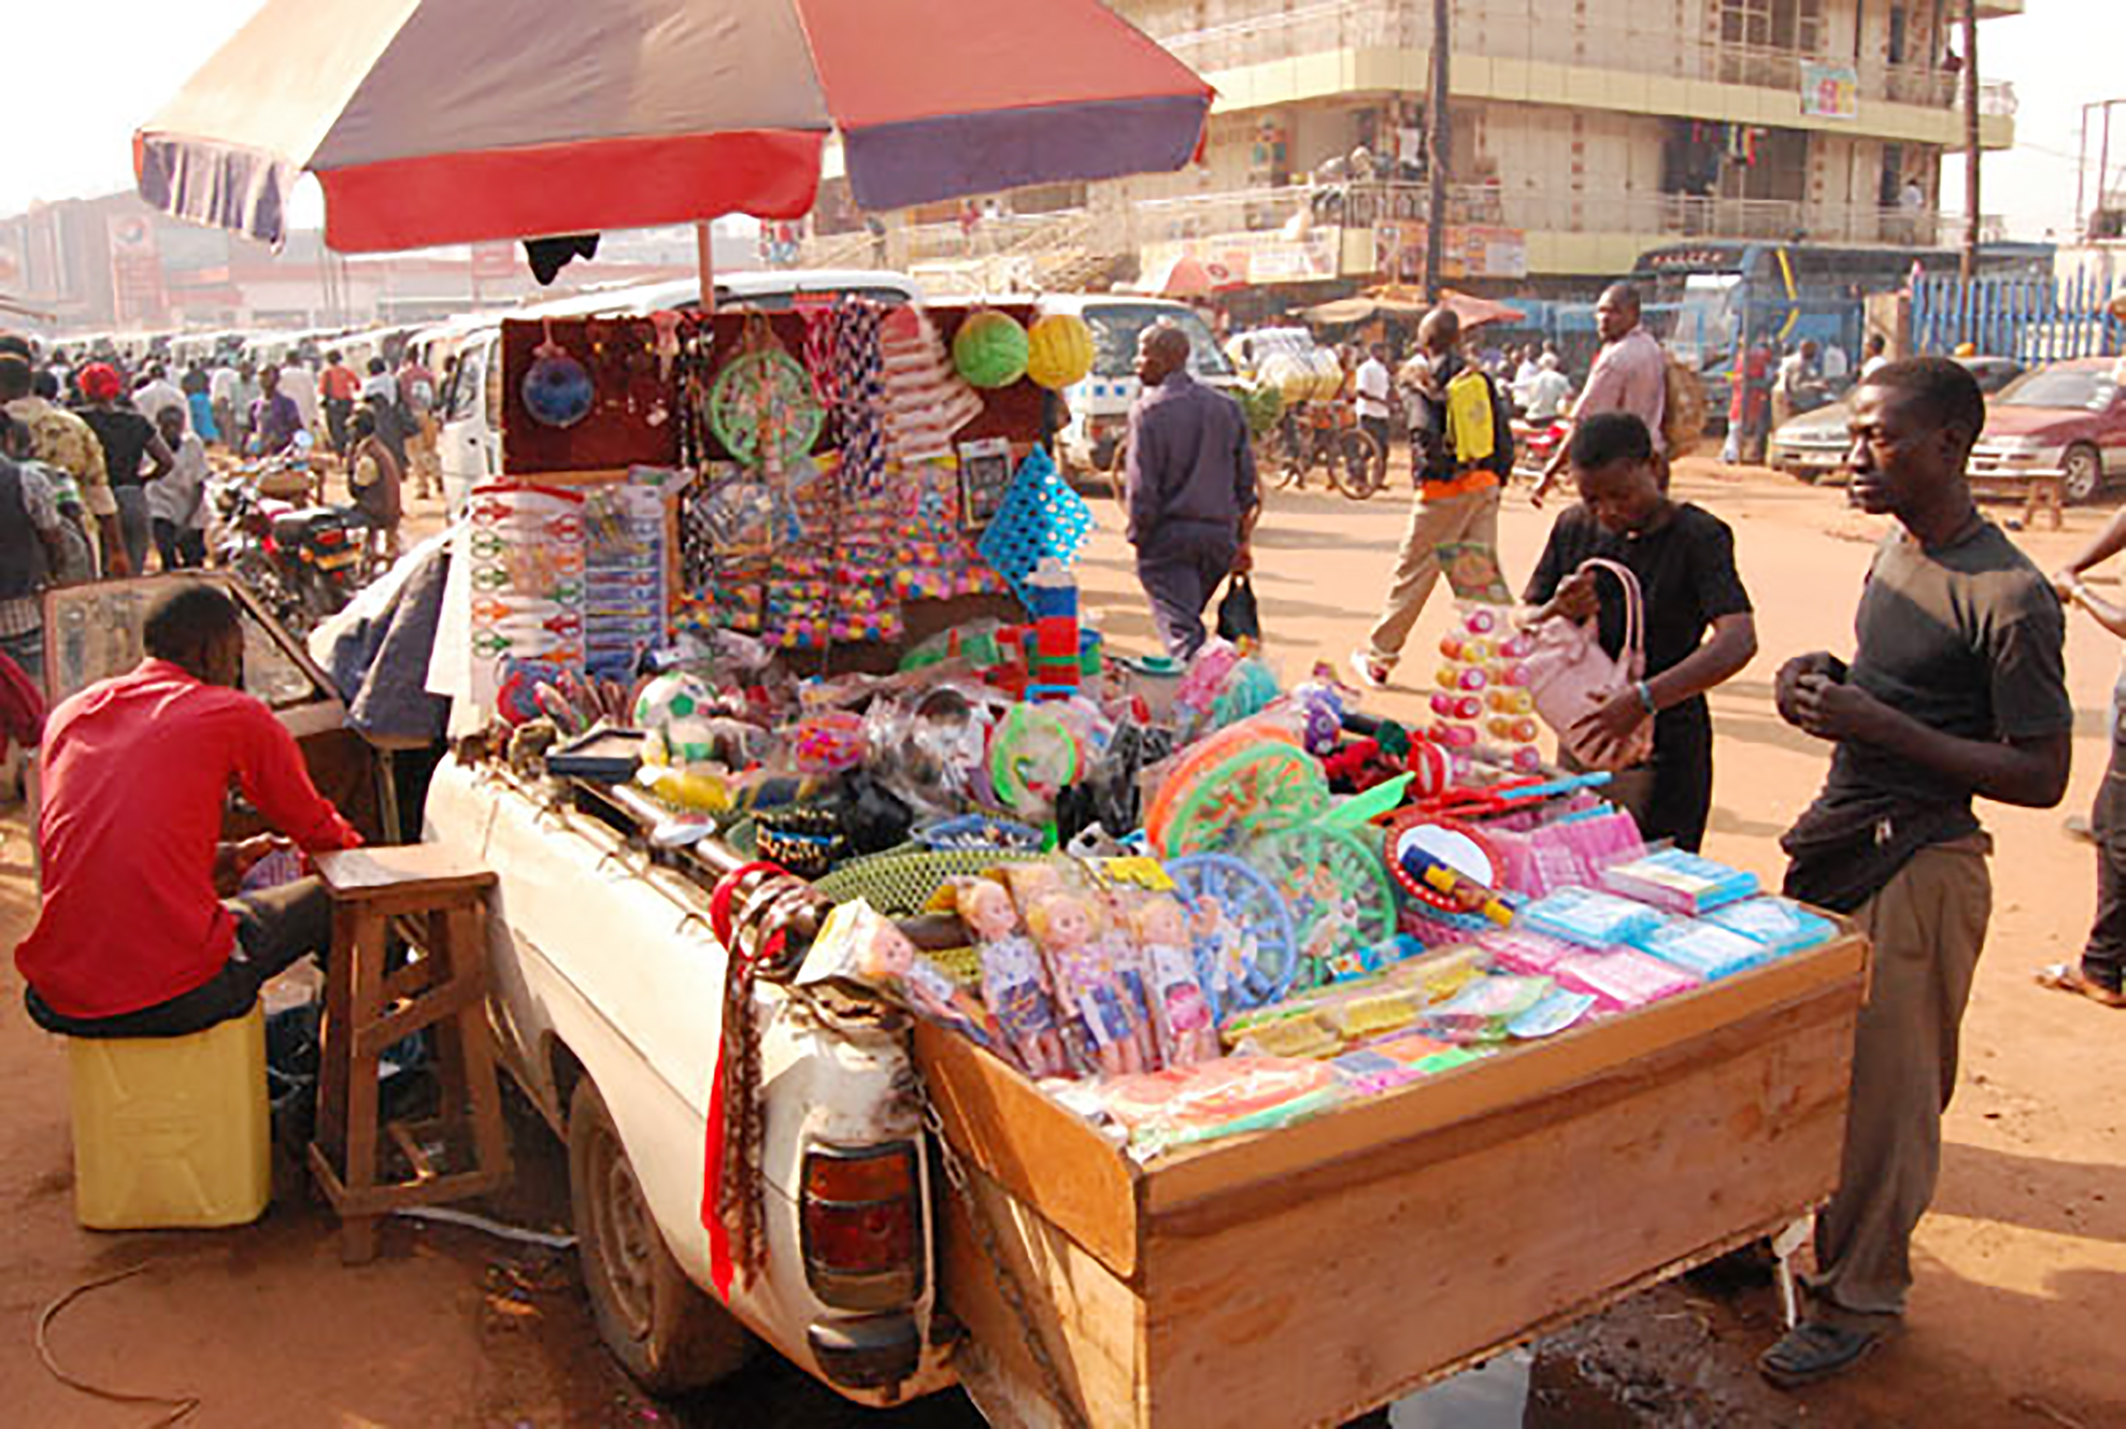 A man uses a wooden bed as a platform on a pick truck to display merchandize near the new taxi park in Kampala on Friday. The multi-purpose pick up serves as a shop, means of transport as well as a store. Kampala Capital City Authority has vowed to chase away vendors from the city streets but there is now a new trend of vendors selling  merchandize in vehicles. PHOTO BY STEPHEN OTAGE